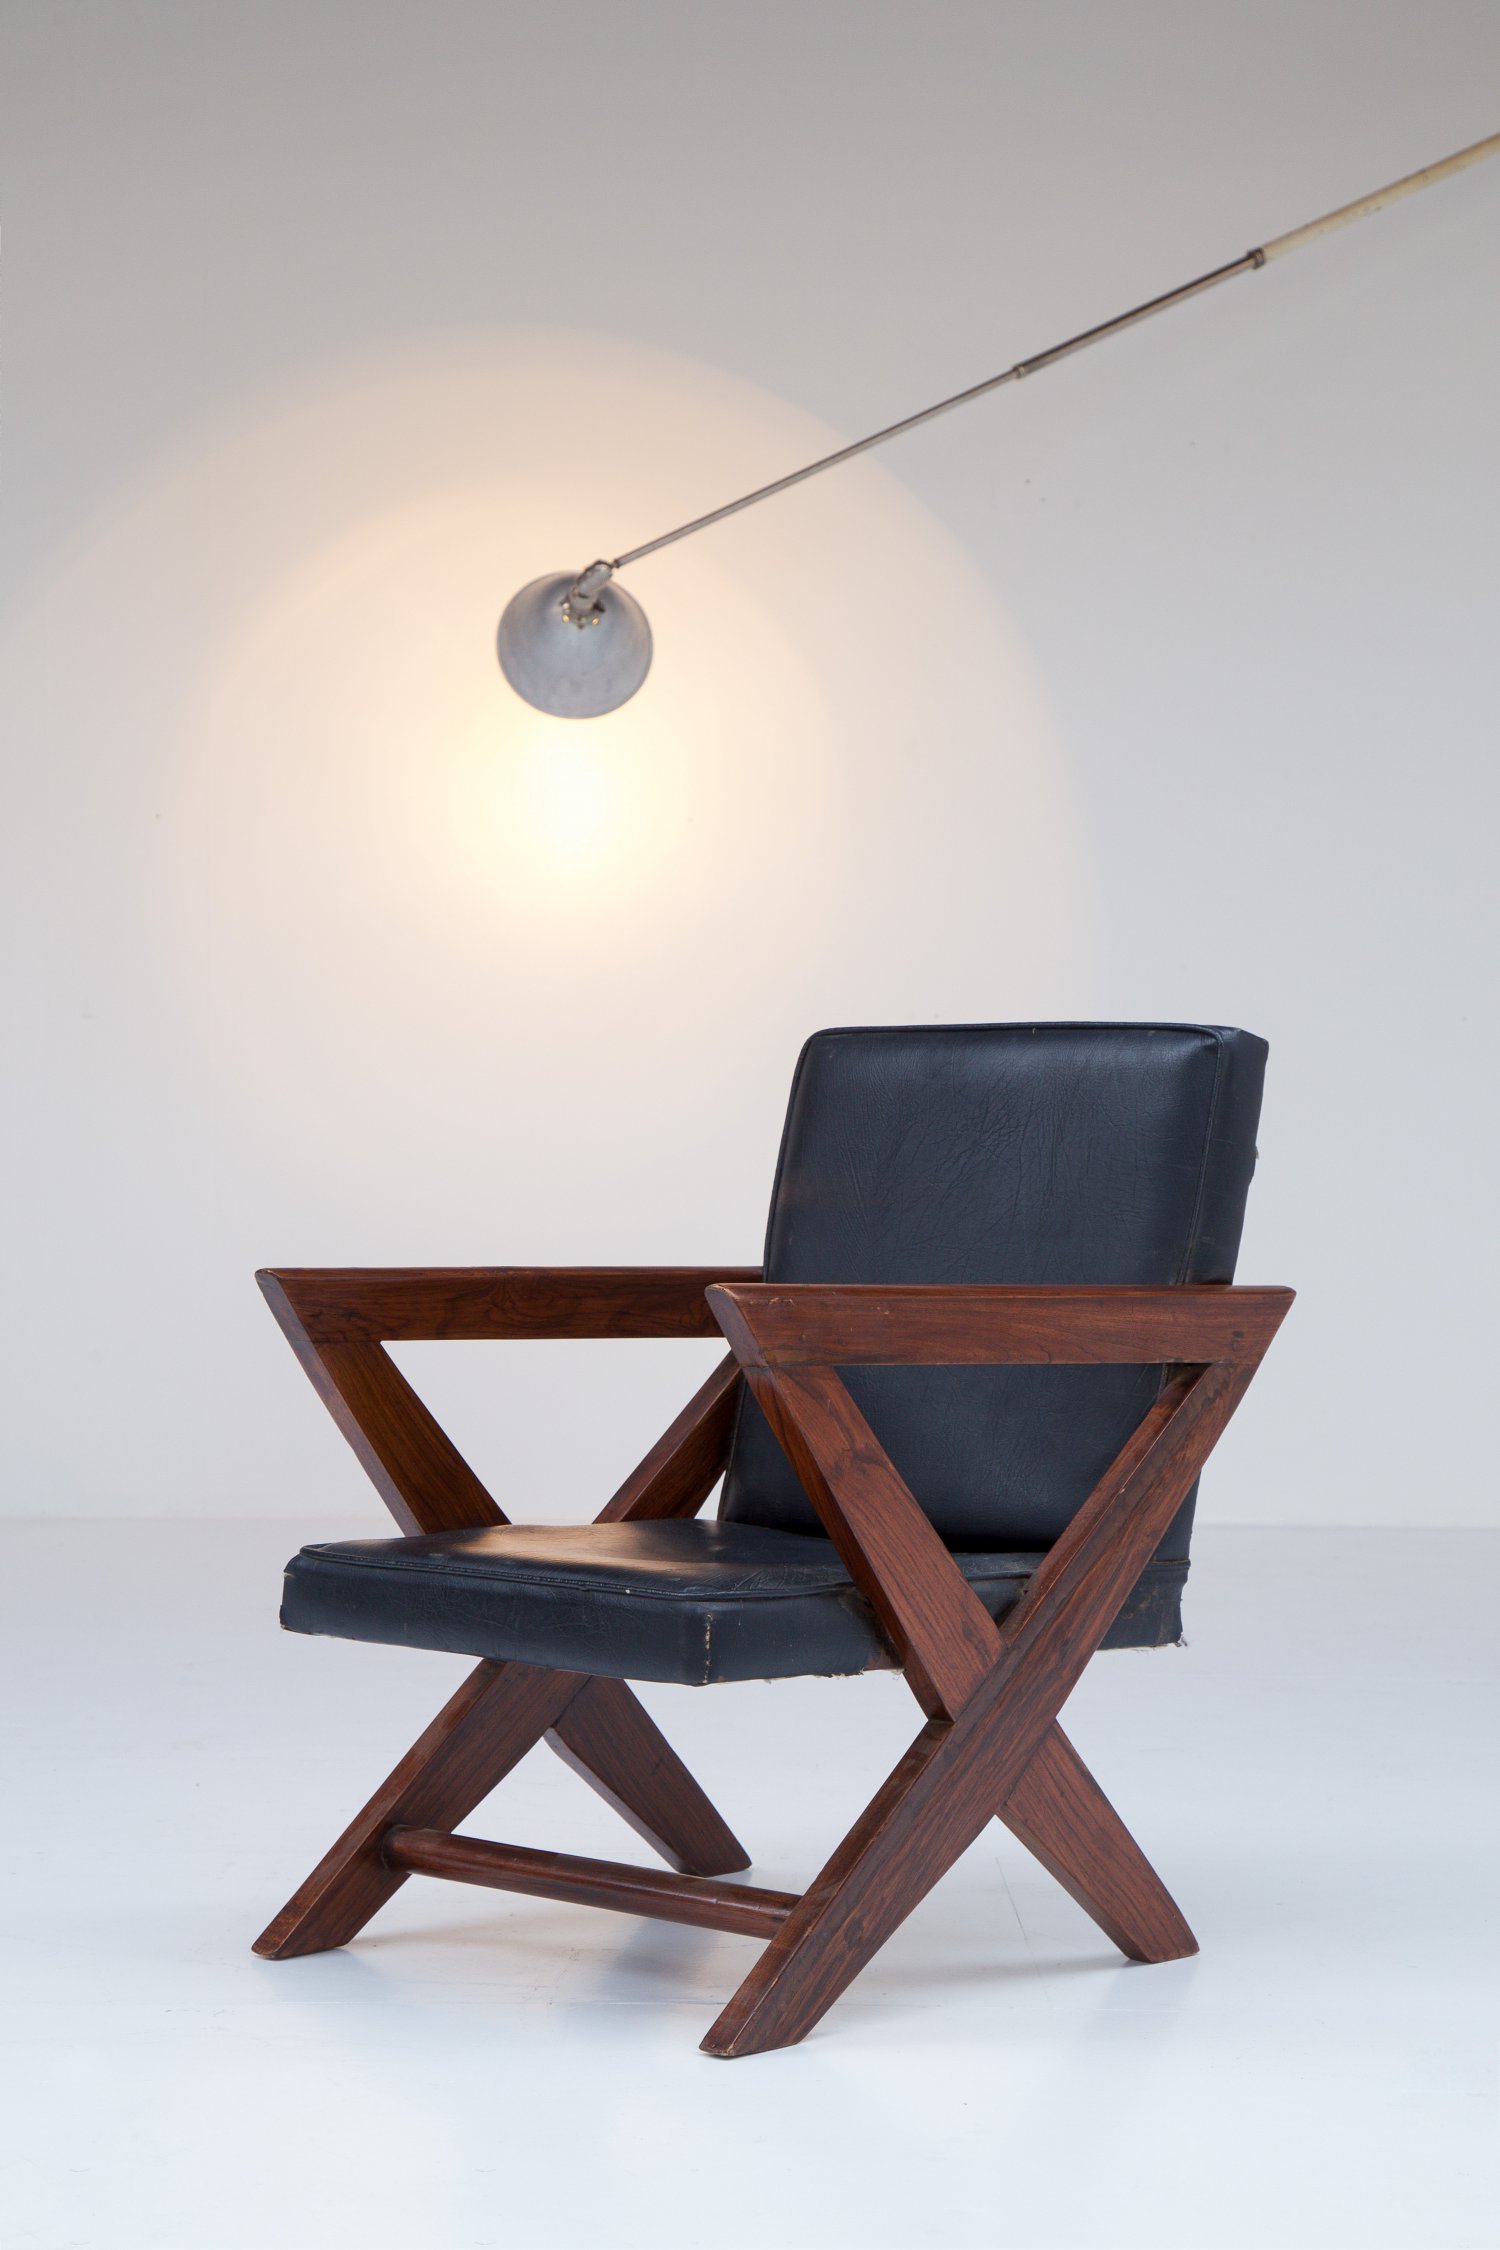 Pierre Jeanneret Lounge chair from M.L.A Flats building in Chandigarh 